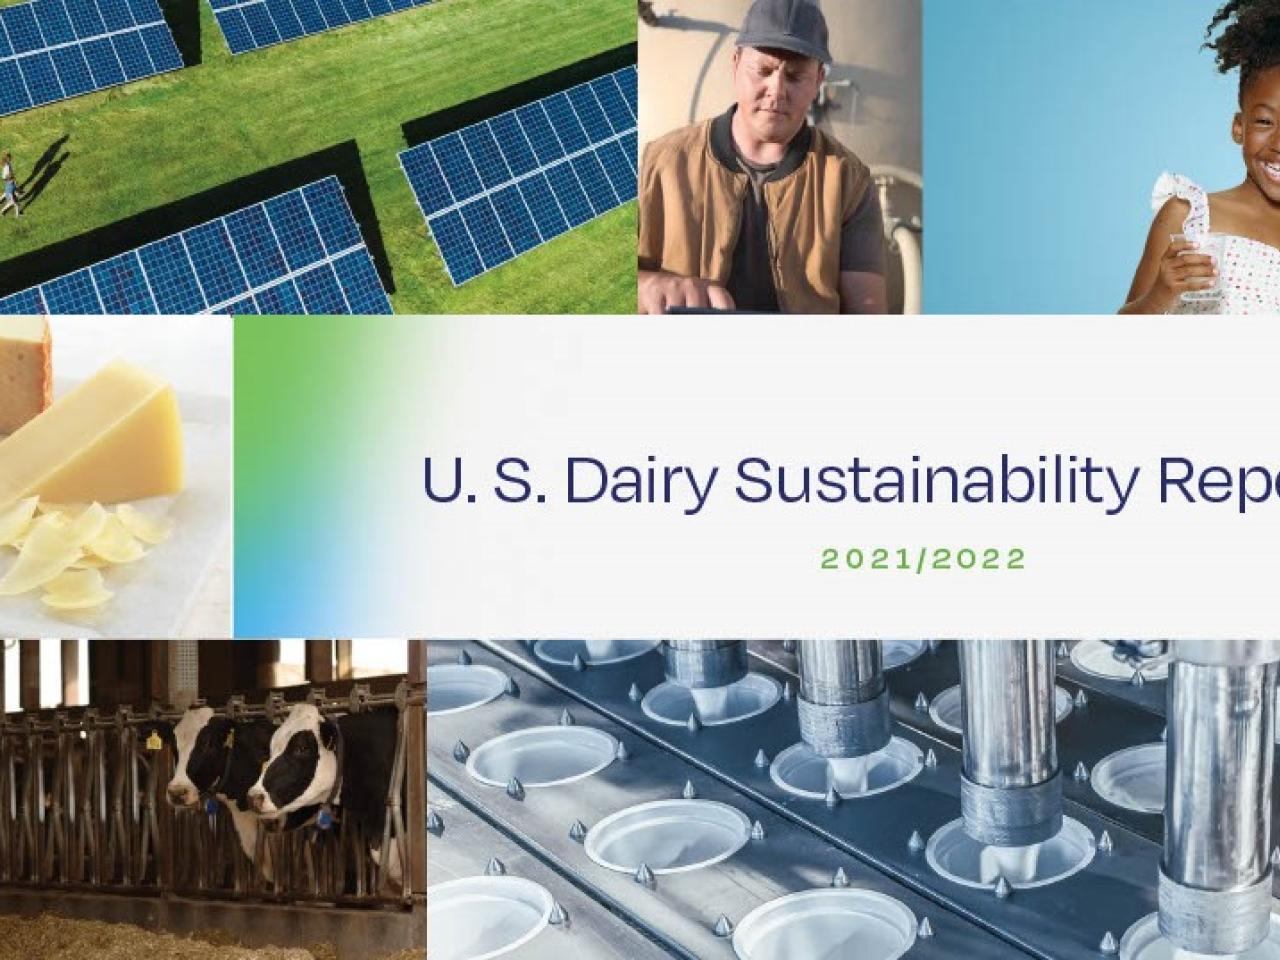 U.S. Dairy Sustainability Report cover with image of dairy cows, people, and solar panels